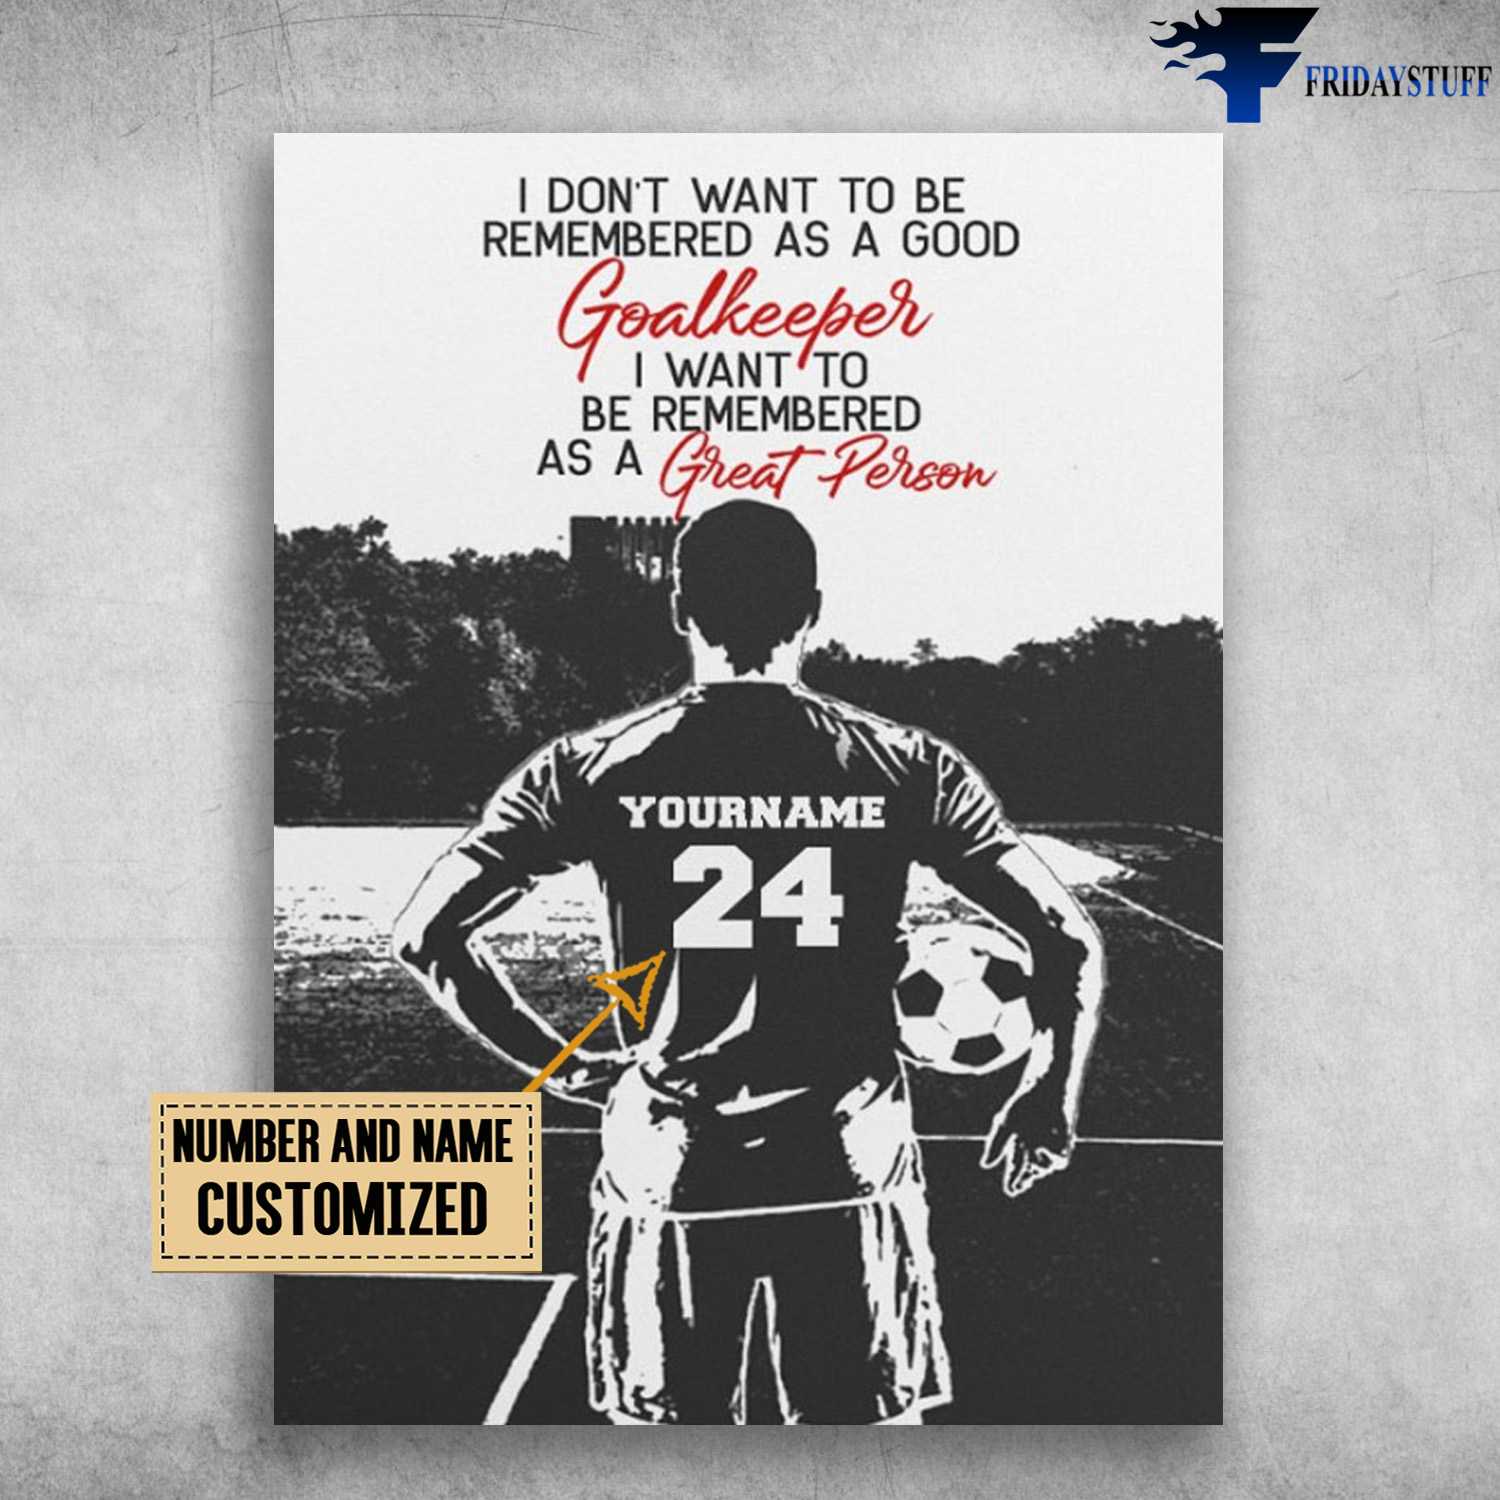 Soccer Player, Soccer Poster, I Don't Want To Be Remembered As A Good Goalkeeper, I Want To Be Remembered As A Great Person